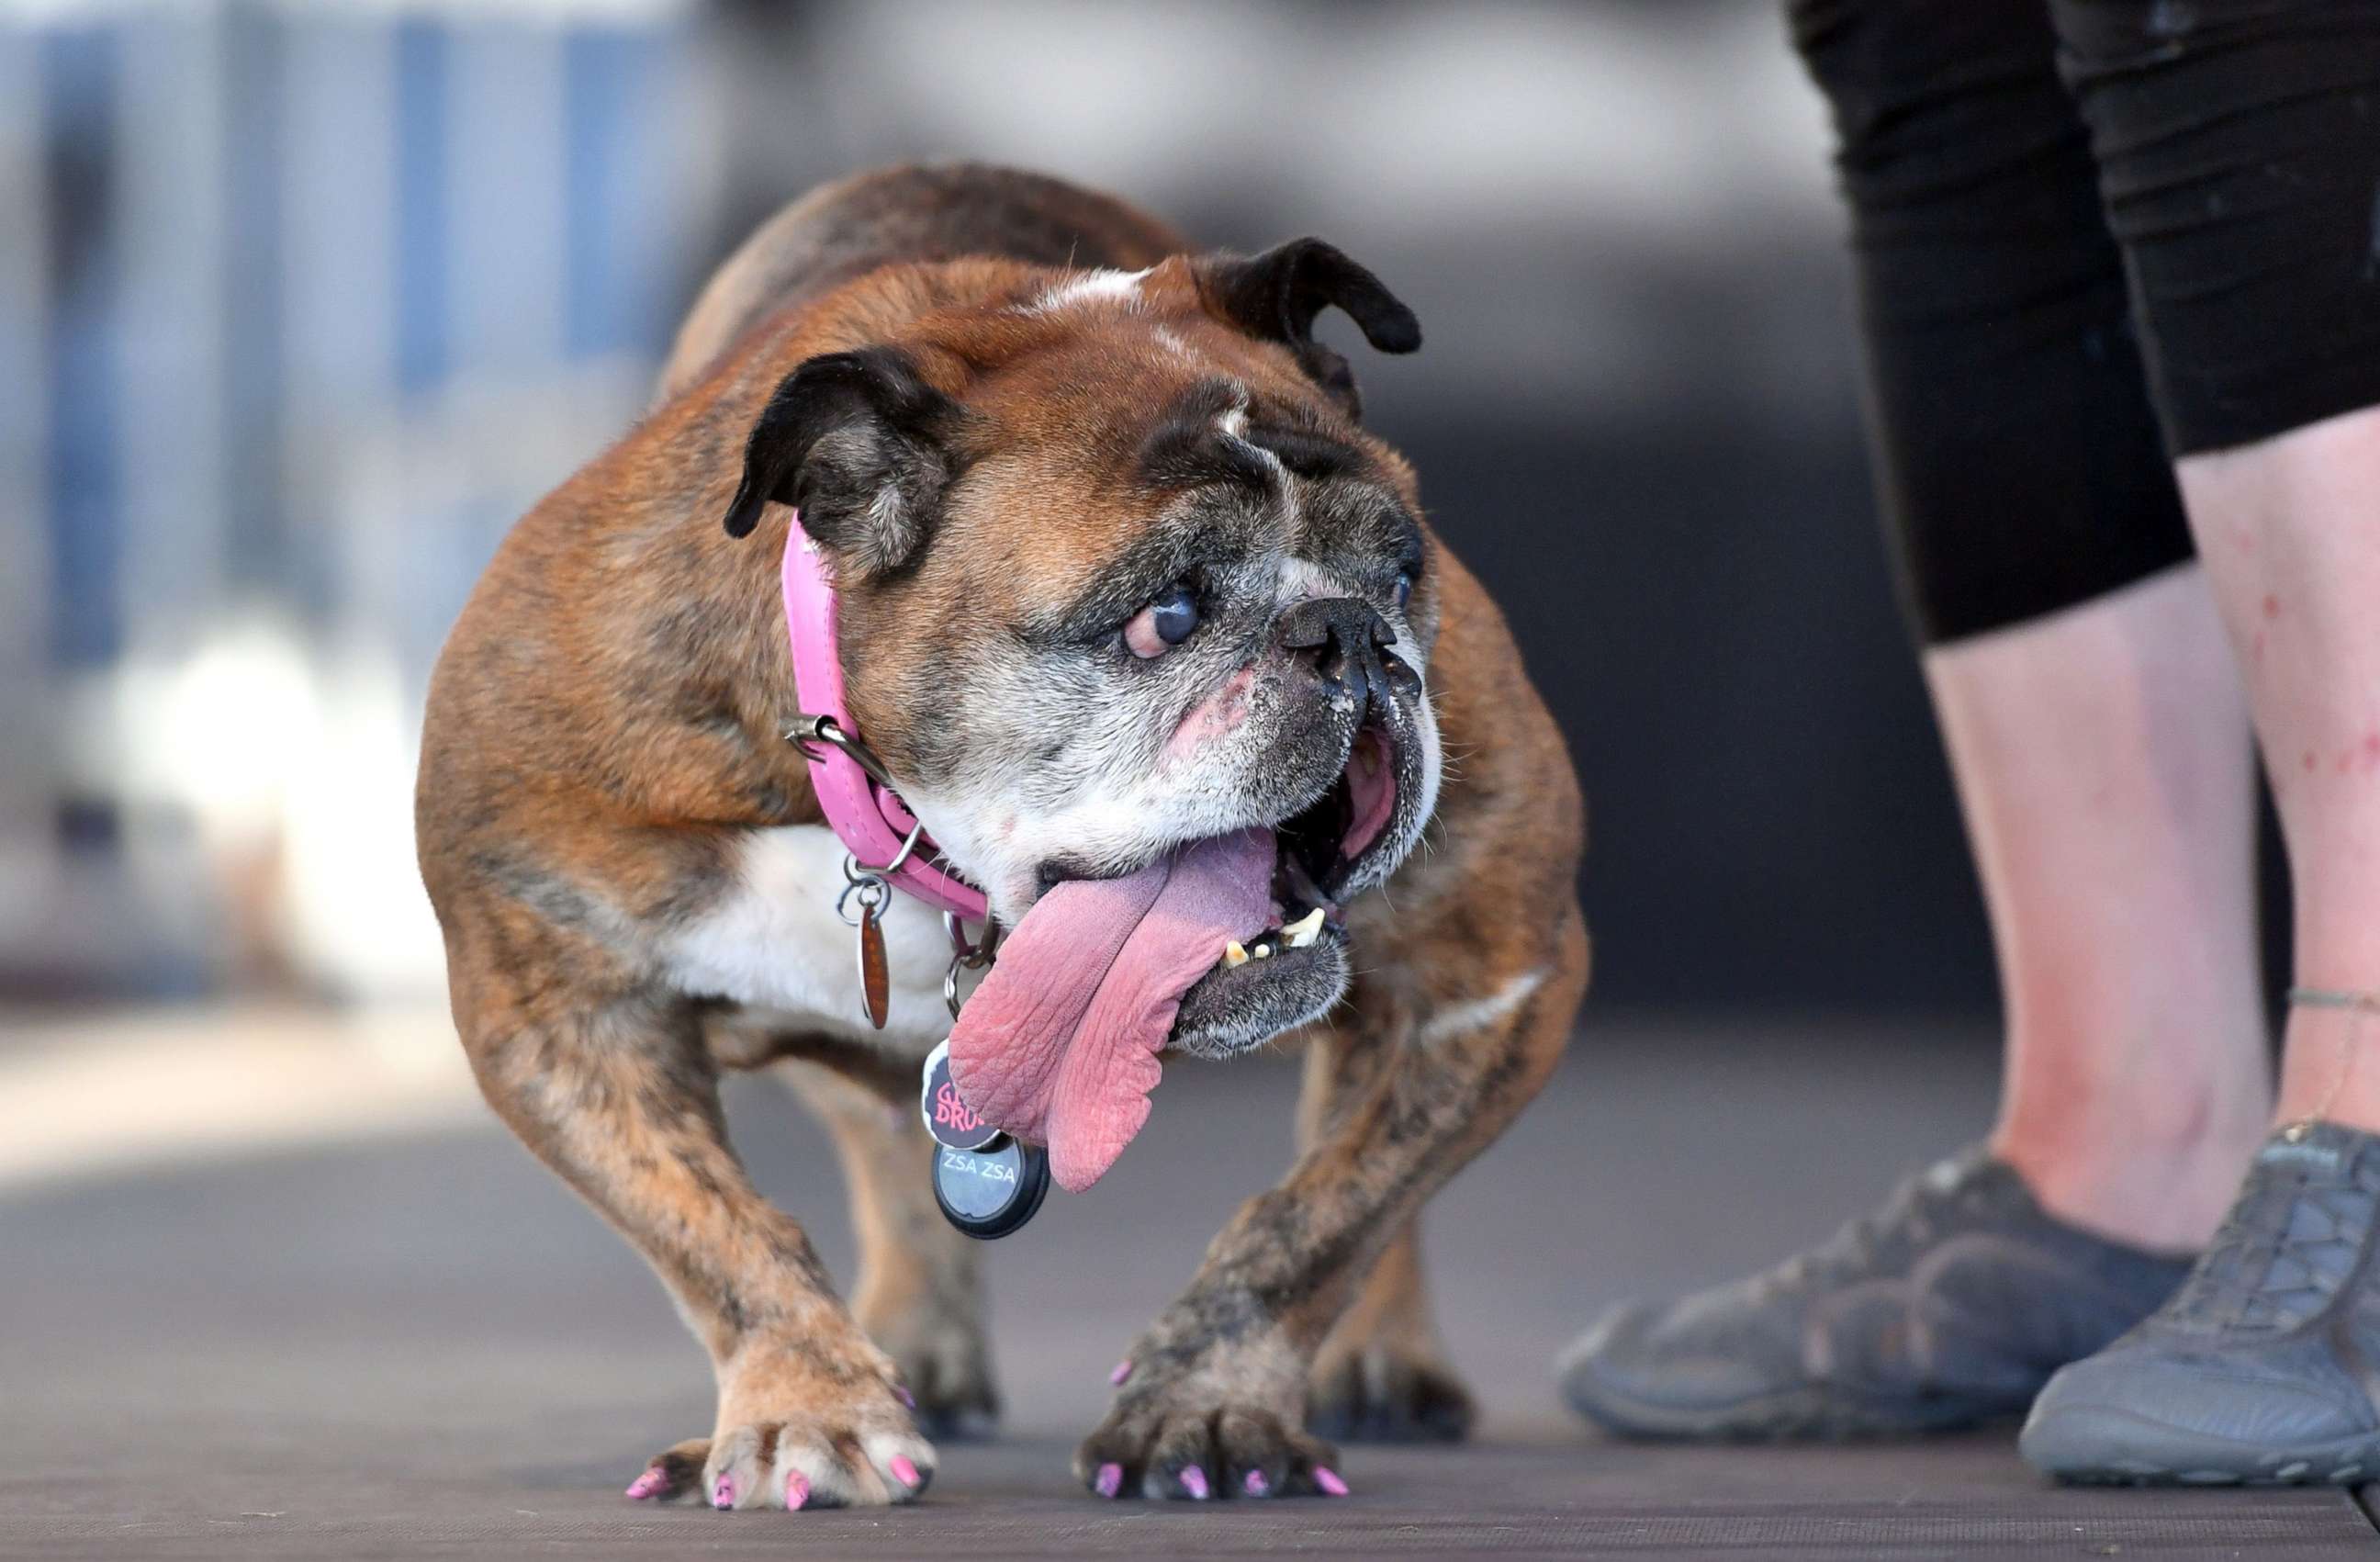 PHOTO: Zsa Zsa, an English Bulldog, takes the stage during The World's Ugliest Dog Competition in Petaluma, north of San Francisco, June 23, 2018.